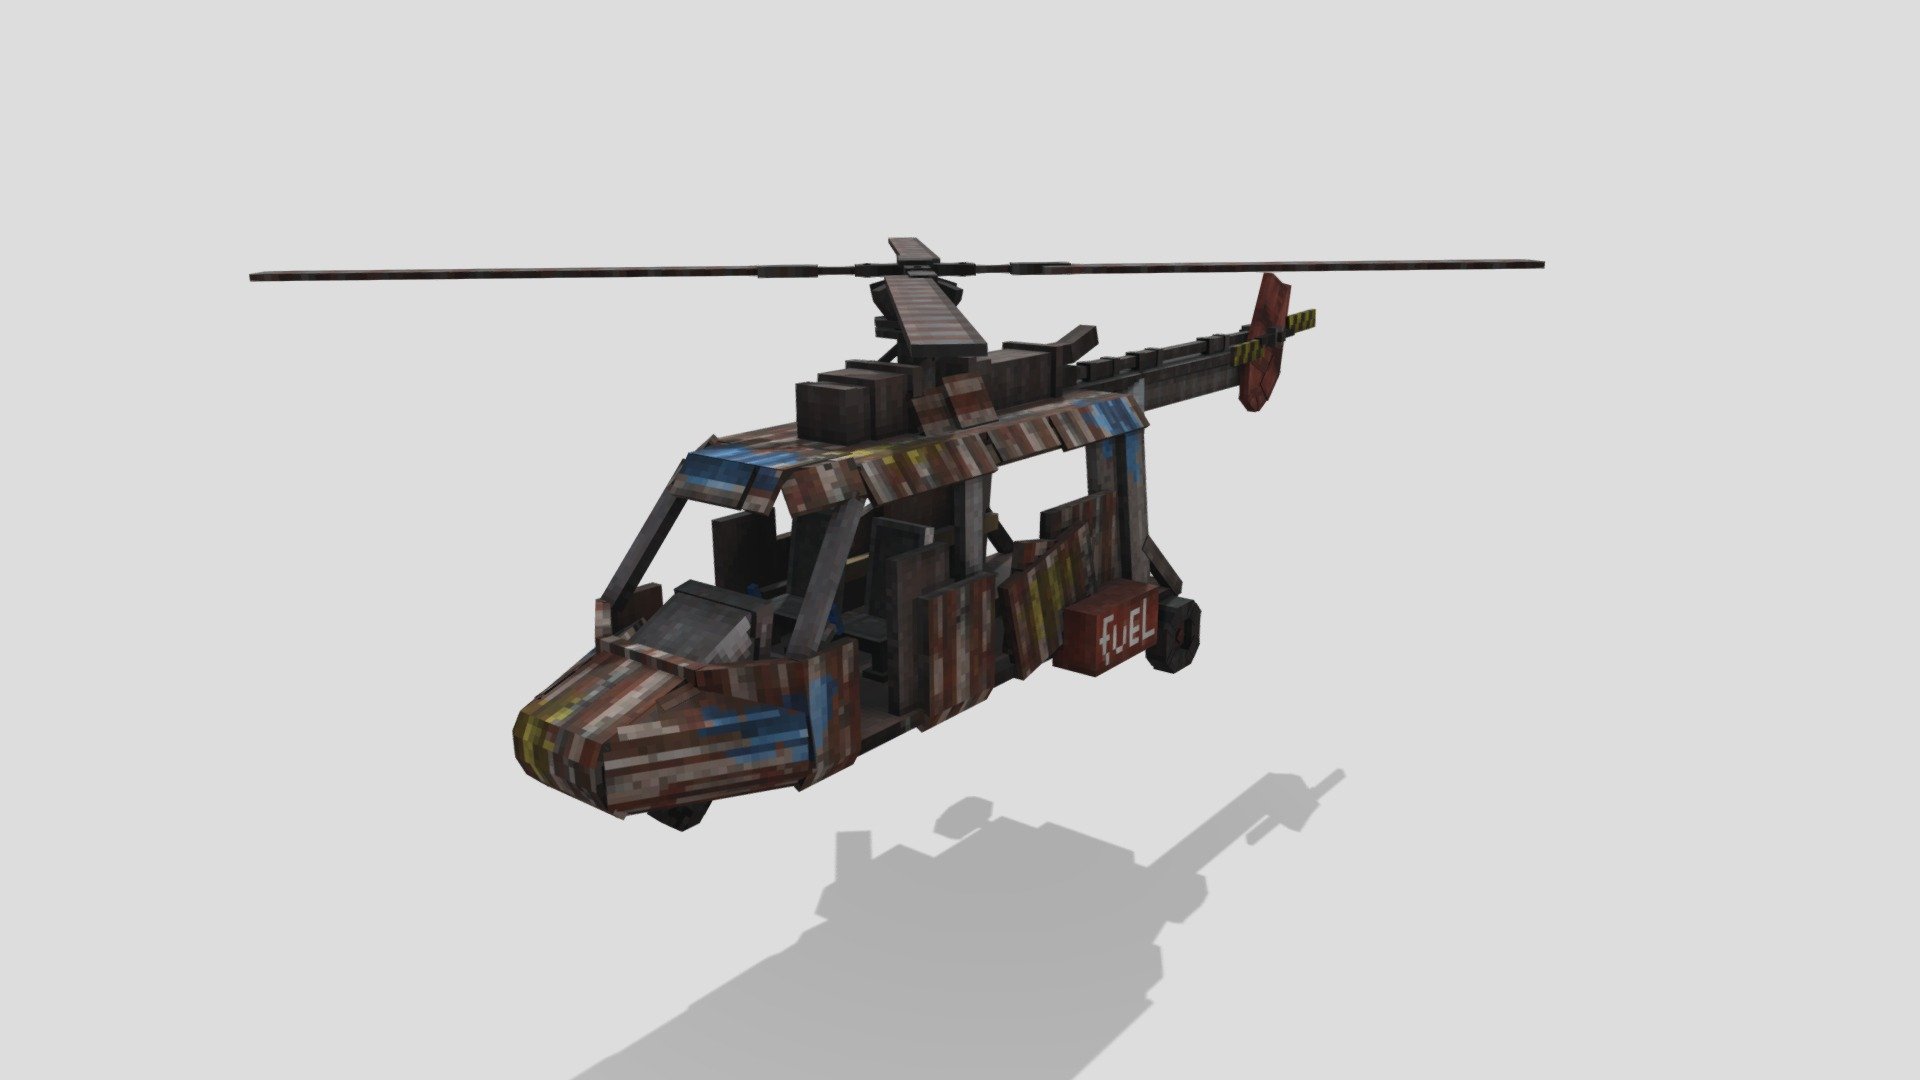 Scrap Transport (Rust Helicopter) - Minecraft

Want to have a custom model? Contact: wasteland4013 (Discord)|Comms Open - Scrap Transport (Rust Helicopter) - Minecraft - 3D model by W'Projects (@wprojects) 3d model